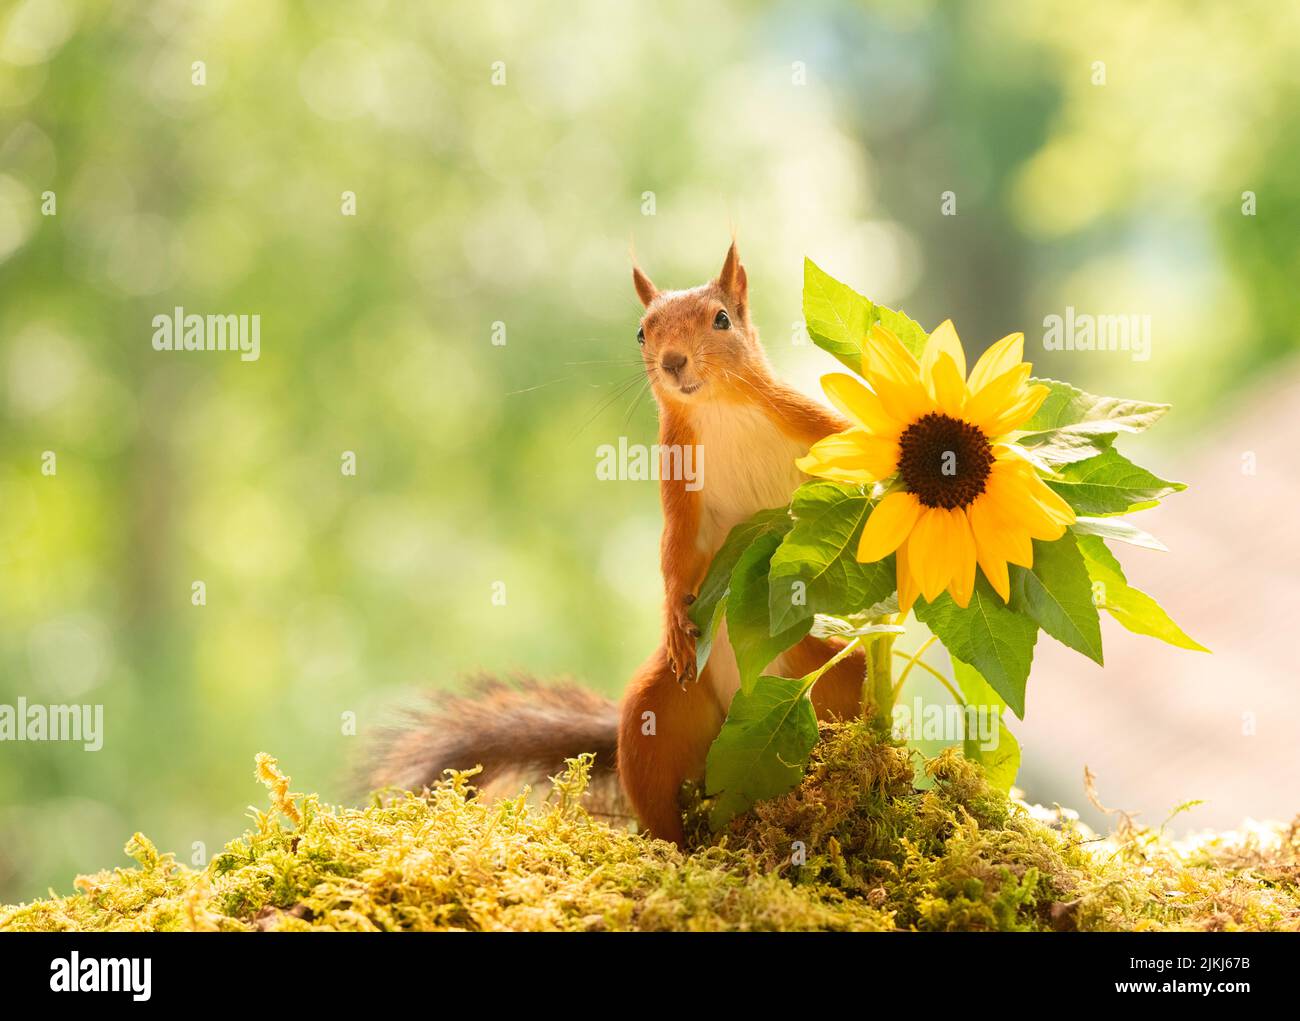 Red Squirrel with a sunflower Stock Photo